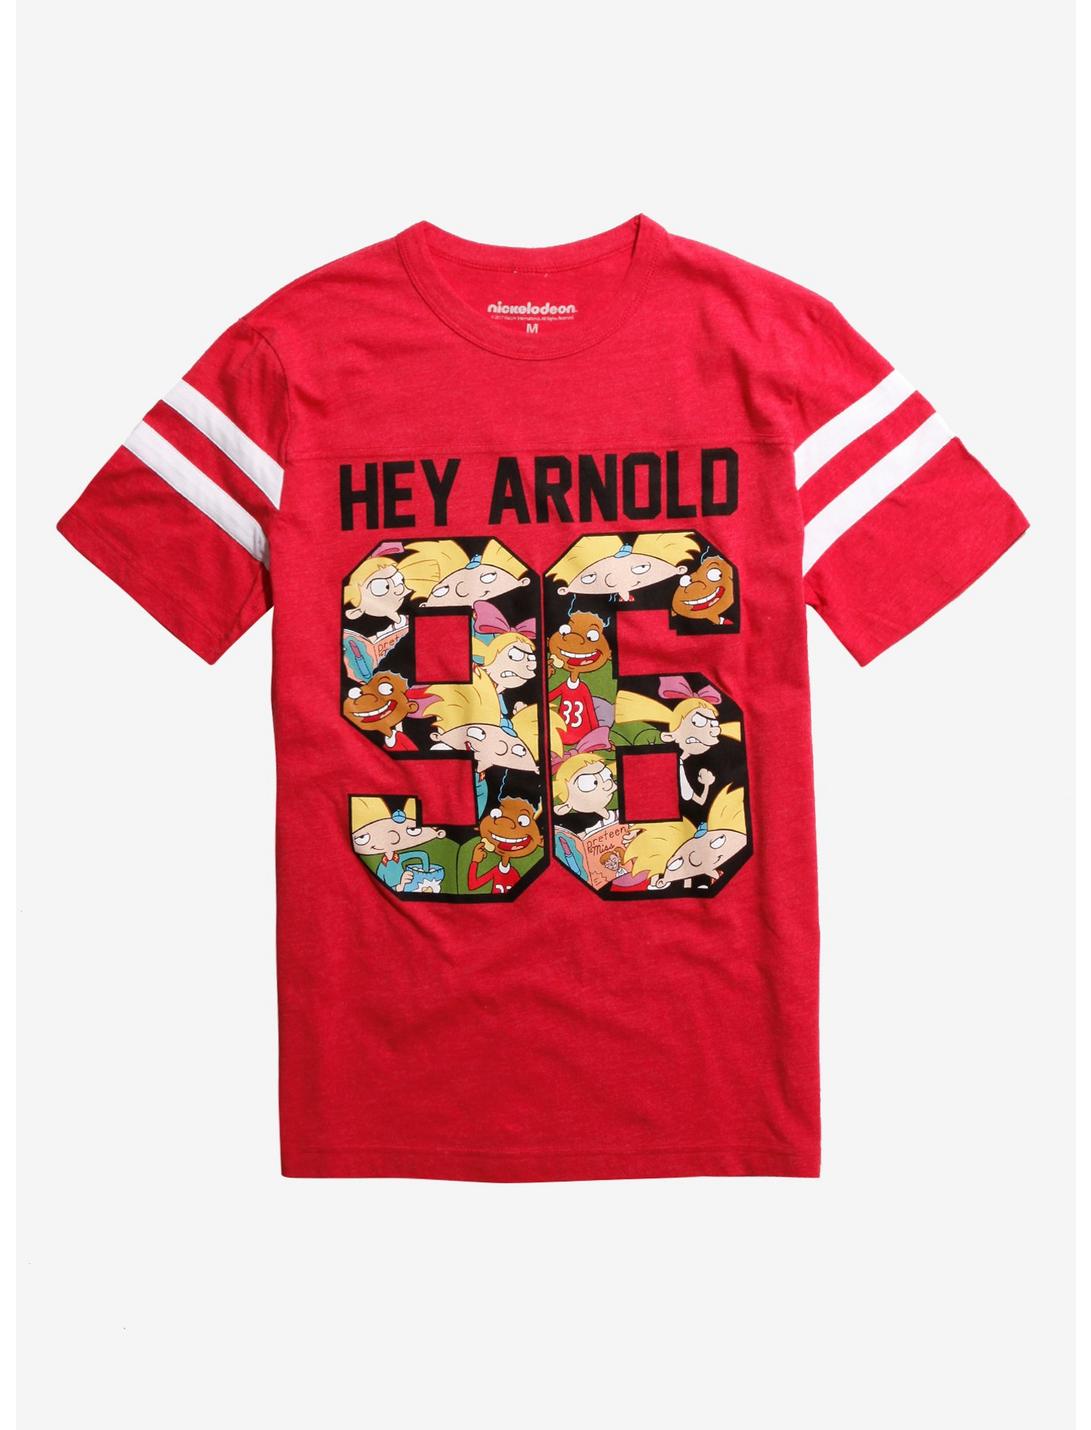 Hey Arnold! 96 Football T-Shirt, RED, hi-res